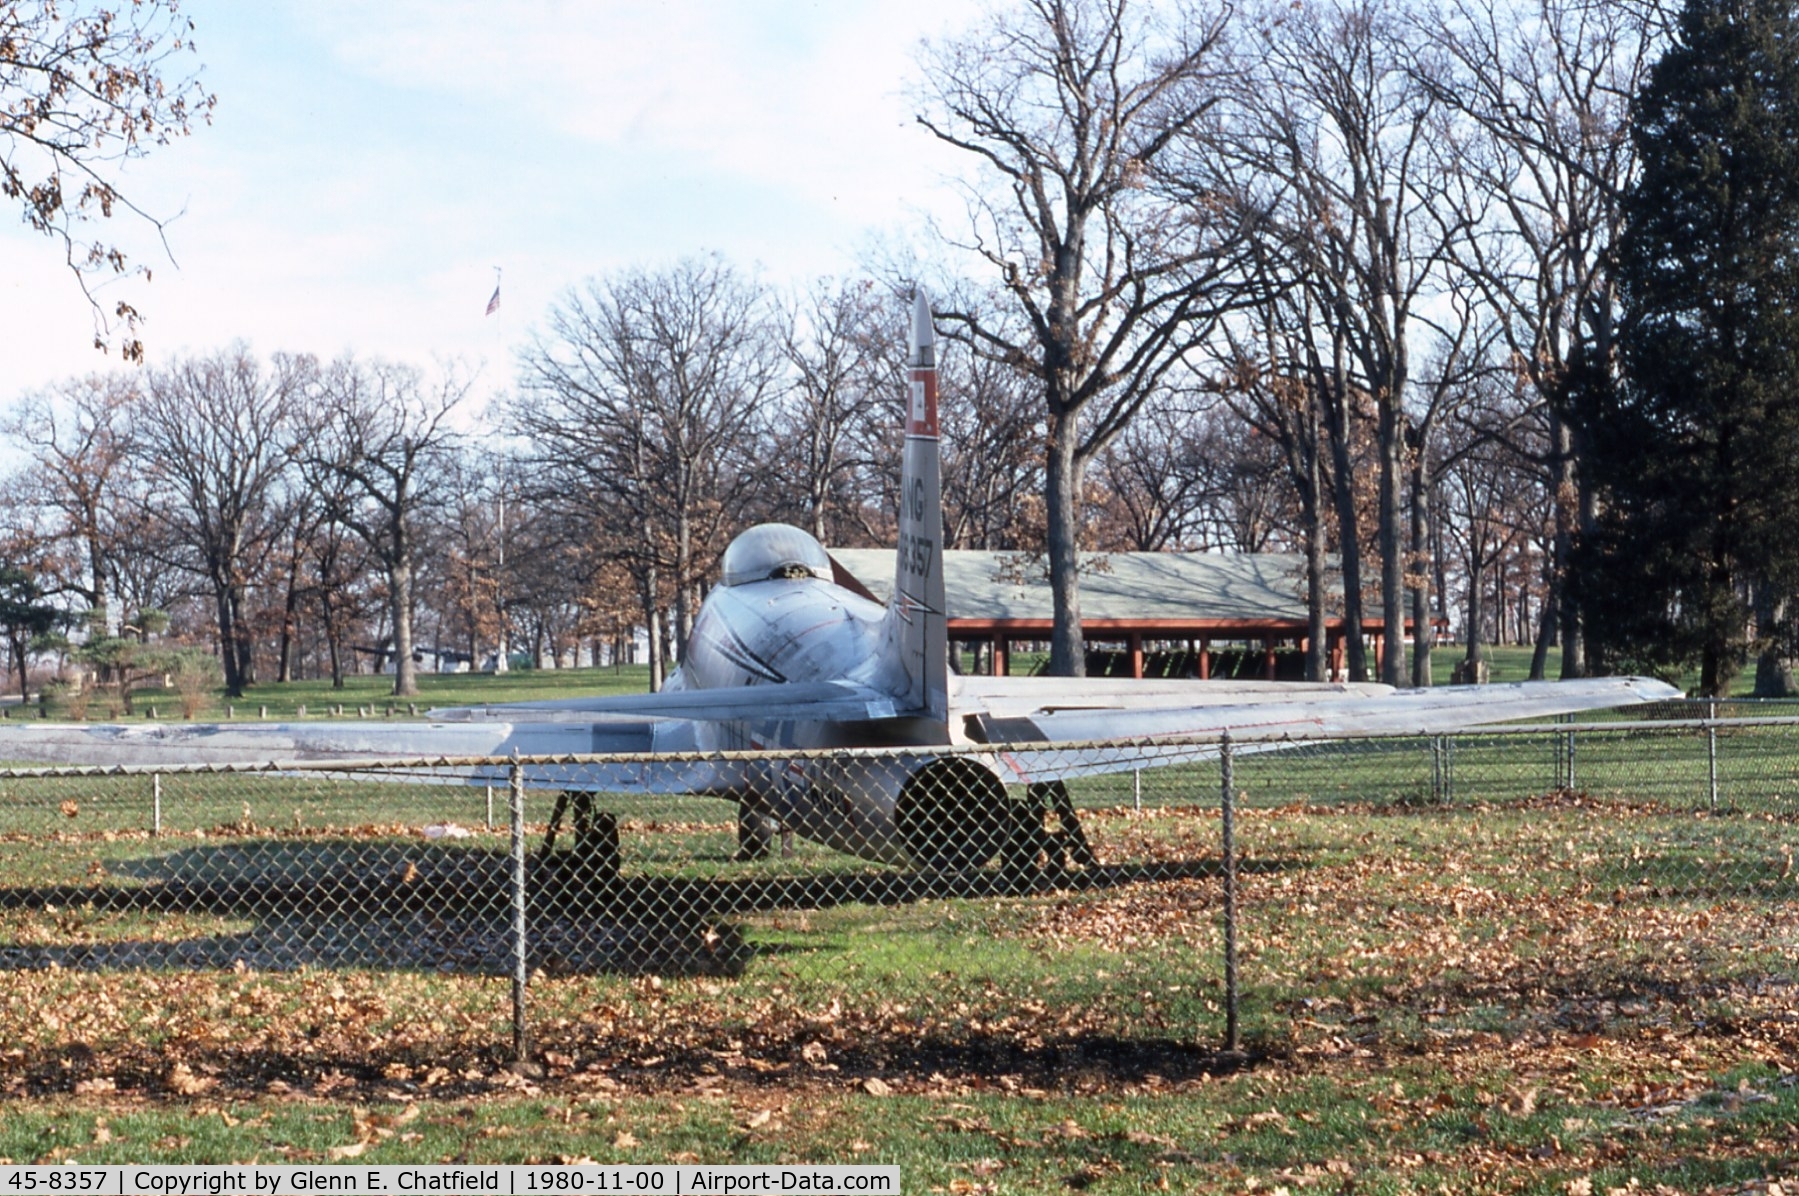 45-8357, 1945 Lockheed F-80C-11-LO Shooting Star C/N 080-1571, At Phillips Park in Aurora, IL.  Later replaced by an F-105.